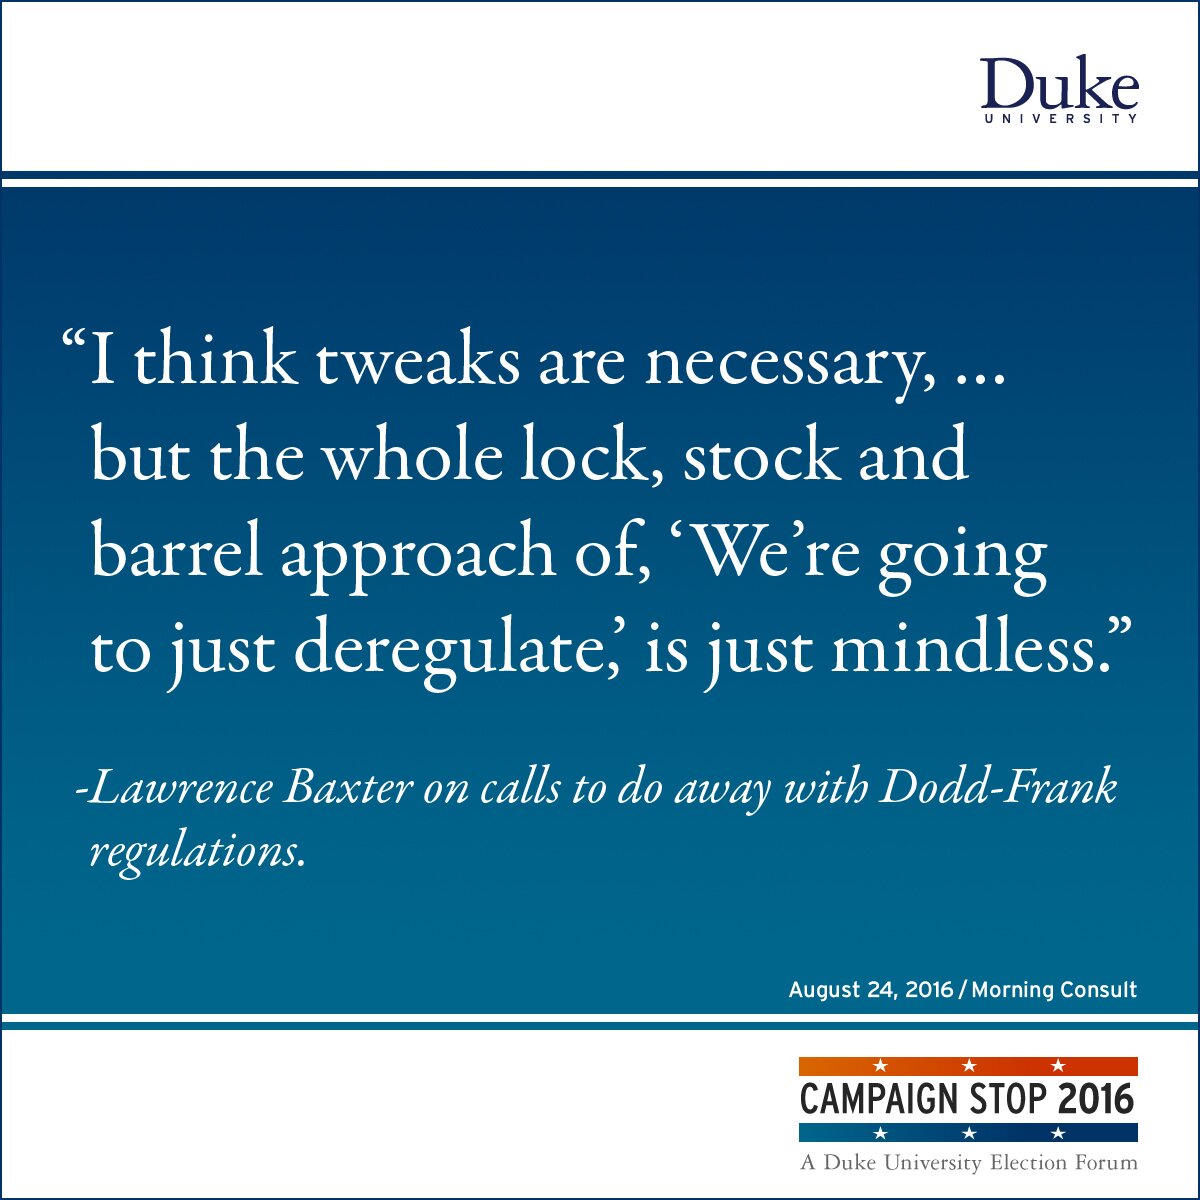 “I think tweaks are necessary, … but the whole lock, stock and barrel approach of, ‘We’re going to just deregulate,’ is just mindless.” -Lawrence Baxter on calls to do away with Dodd-Frank regulations.